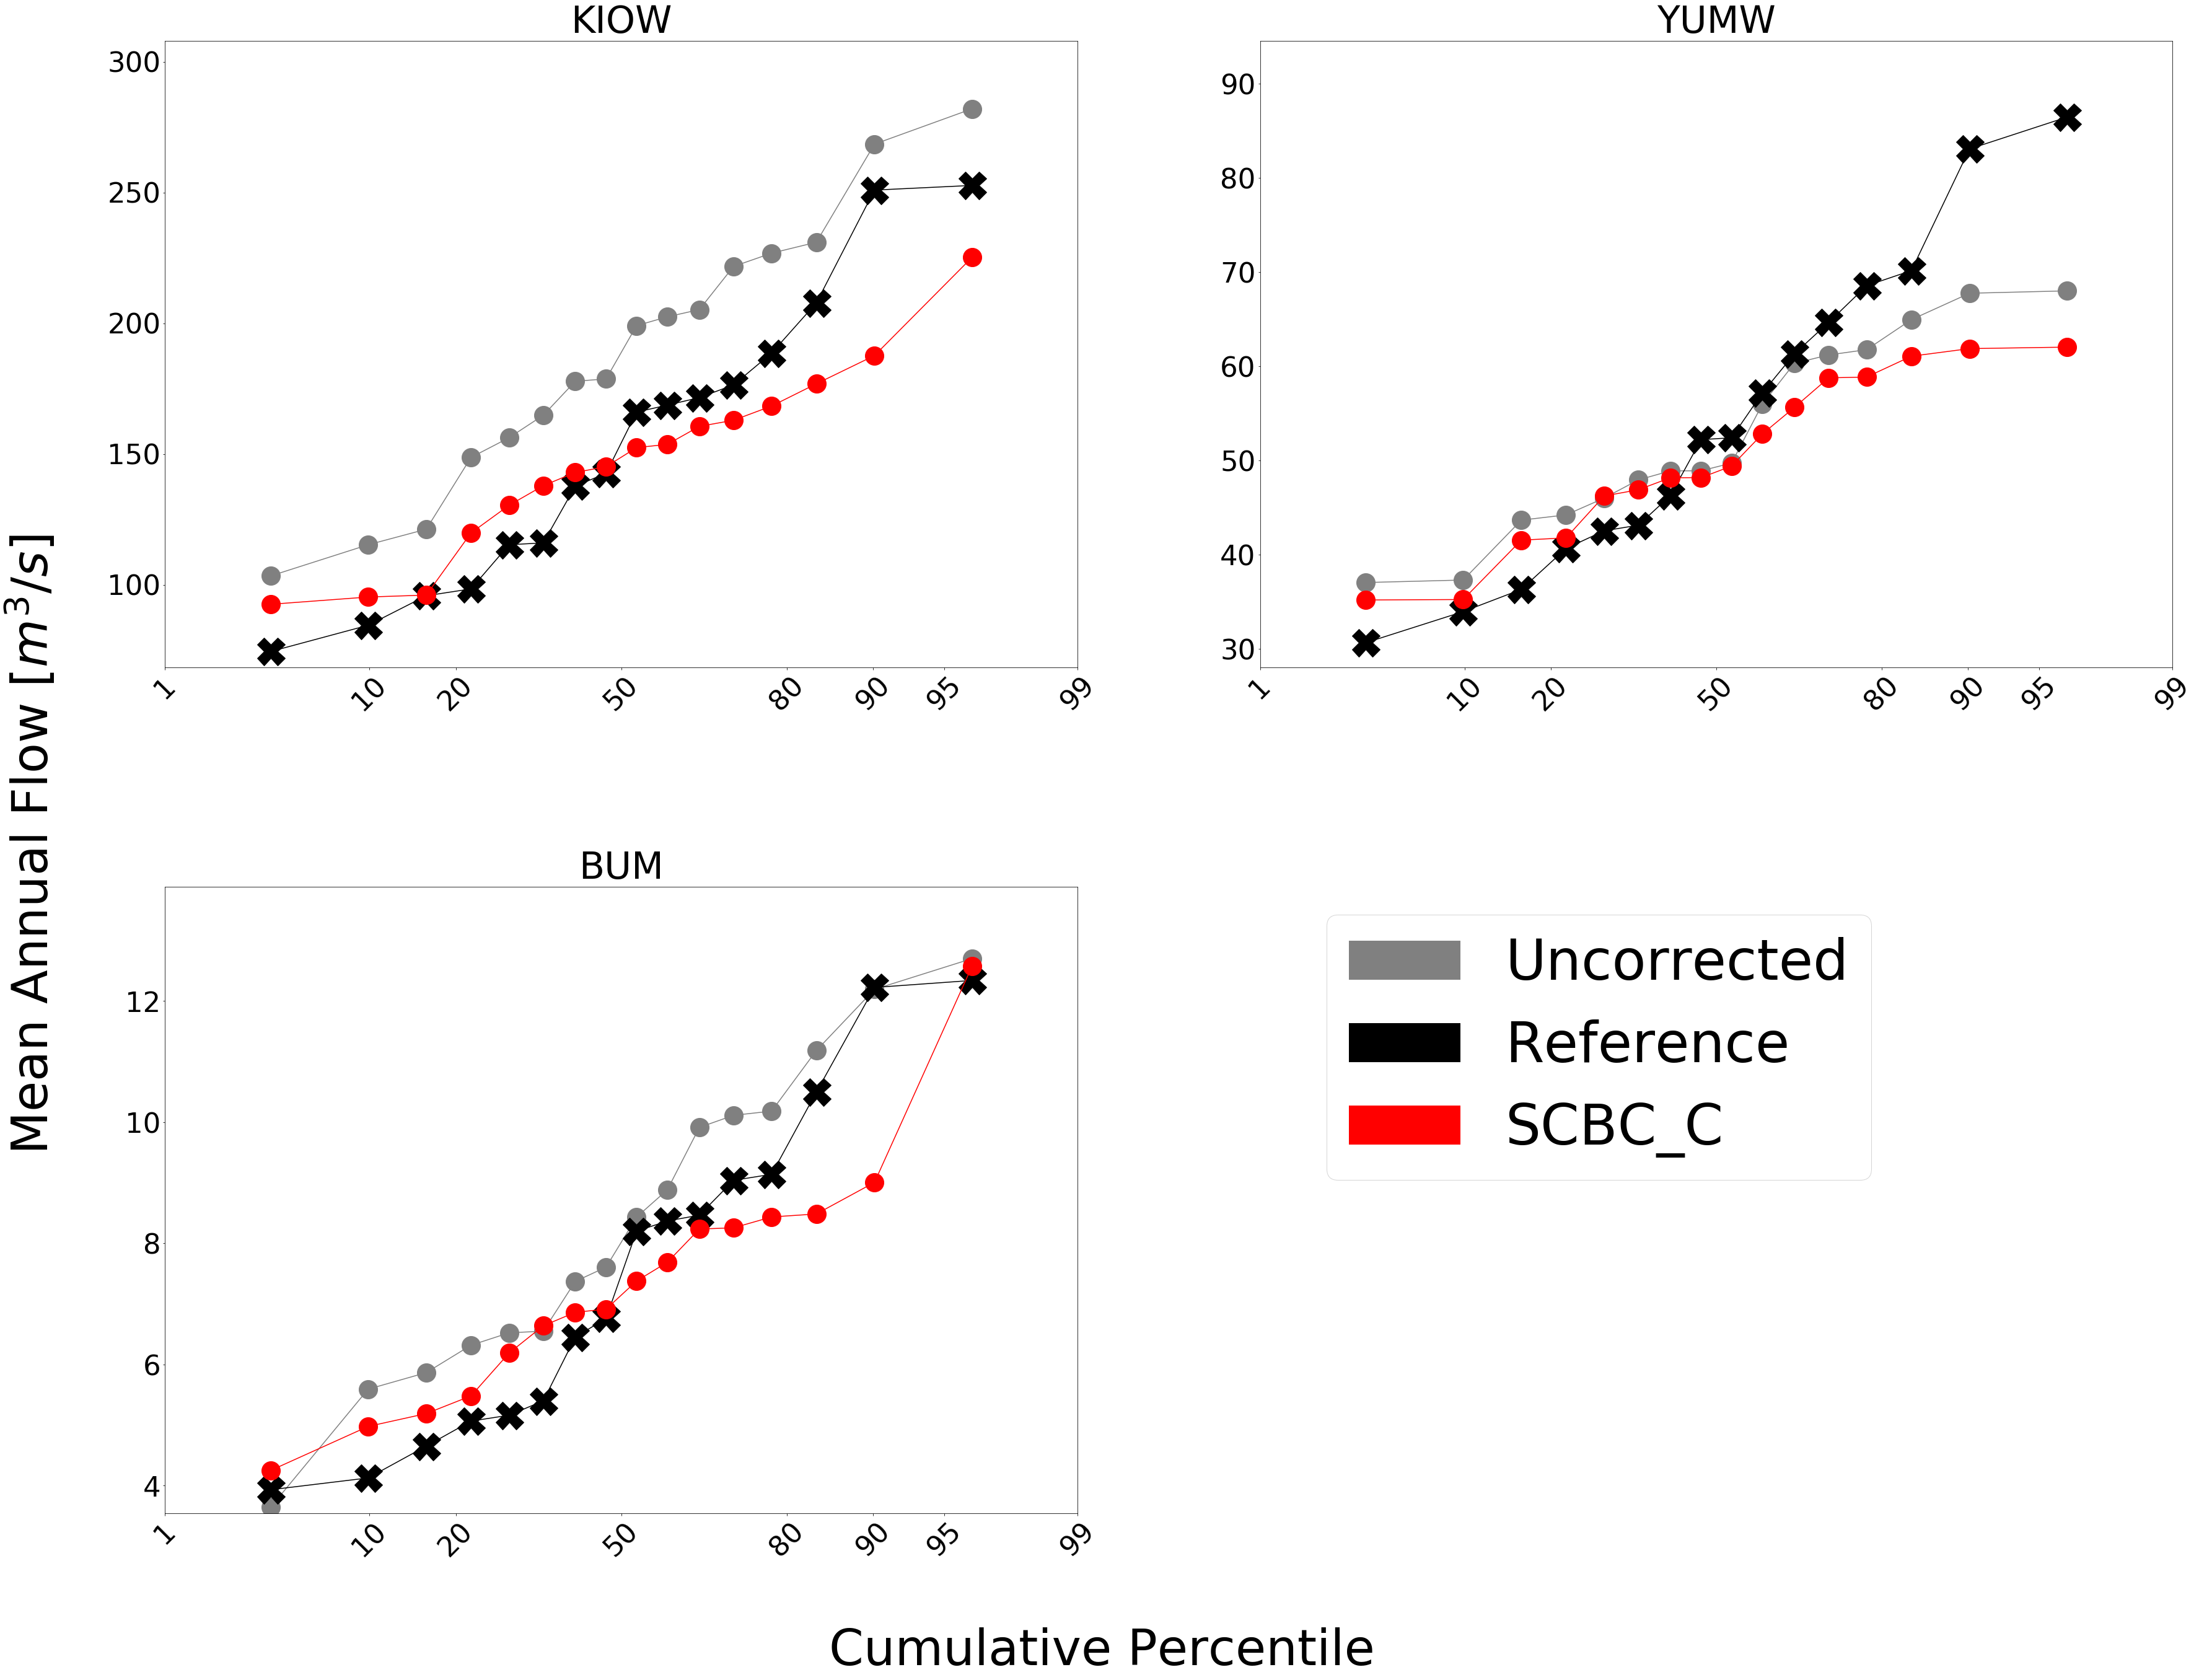 Three cumulative percentile plots labeled KIOW, YUMW, and BUM compare probabilities of mean annual flows at each site as described by raw, reference, and scbc_c bias correction.